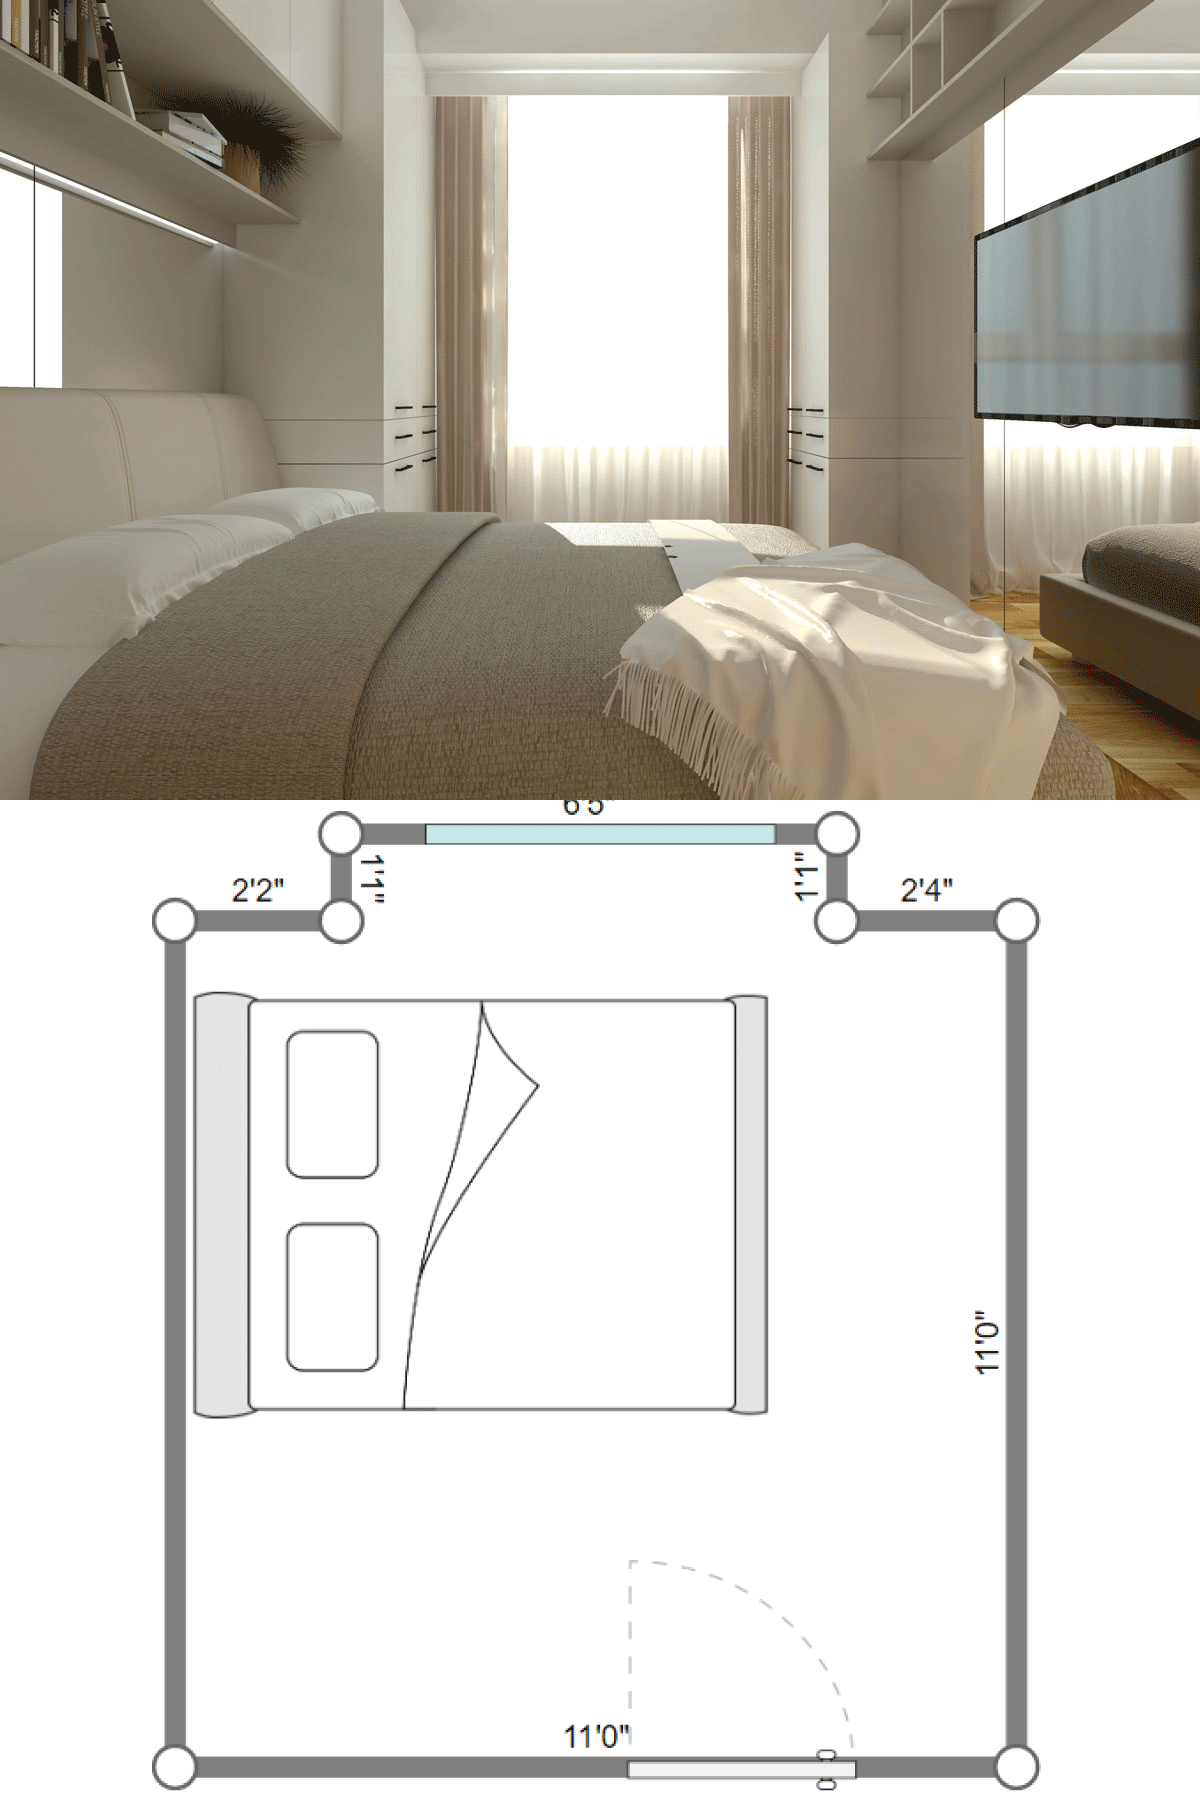 Interior of a small modern white bedroom